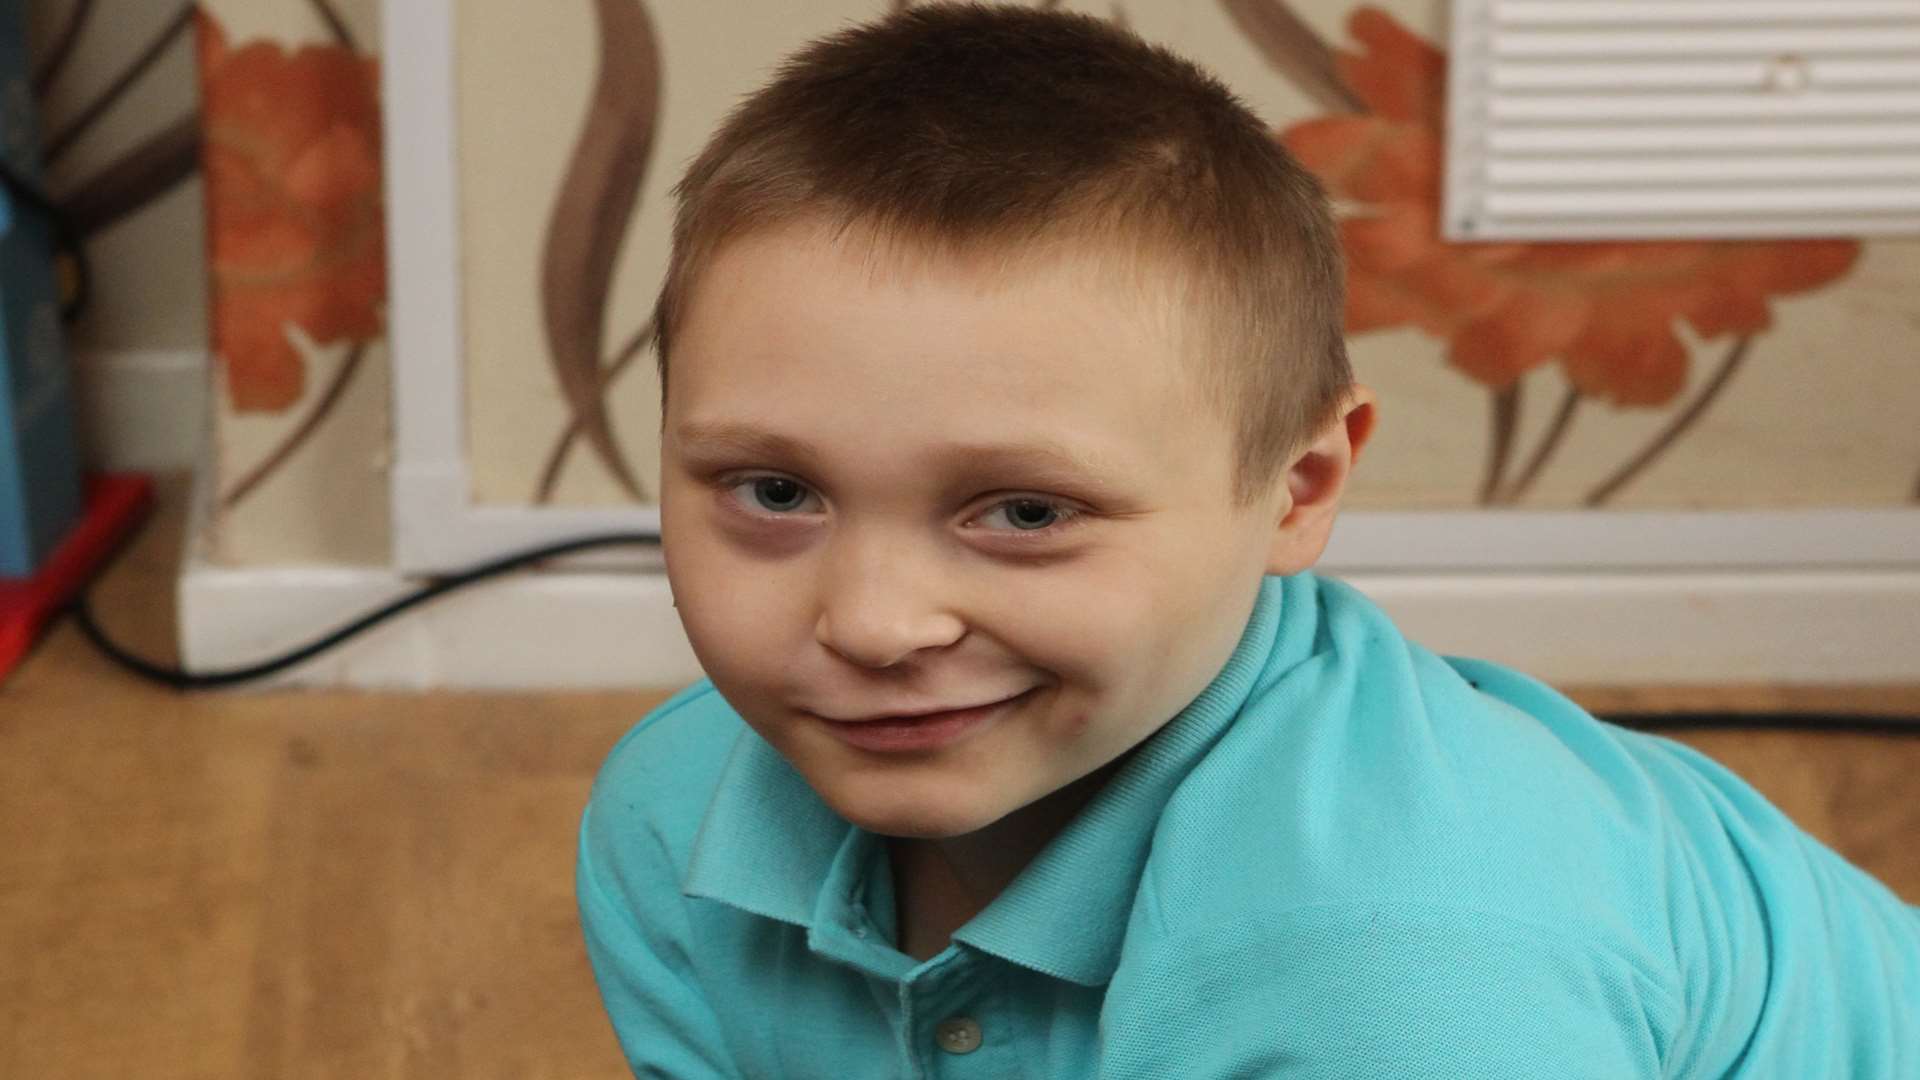 Charlie was diagnosed with Dravet syndrome when he was a baby